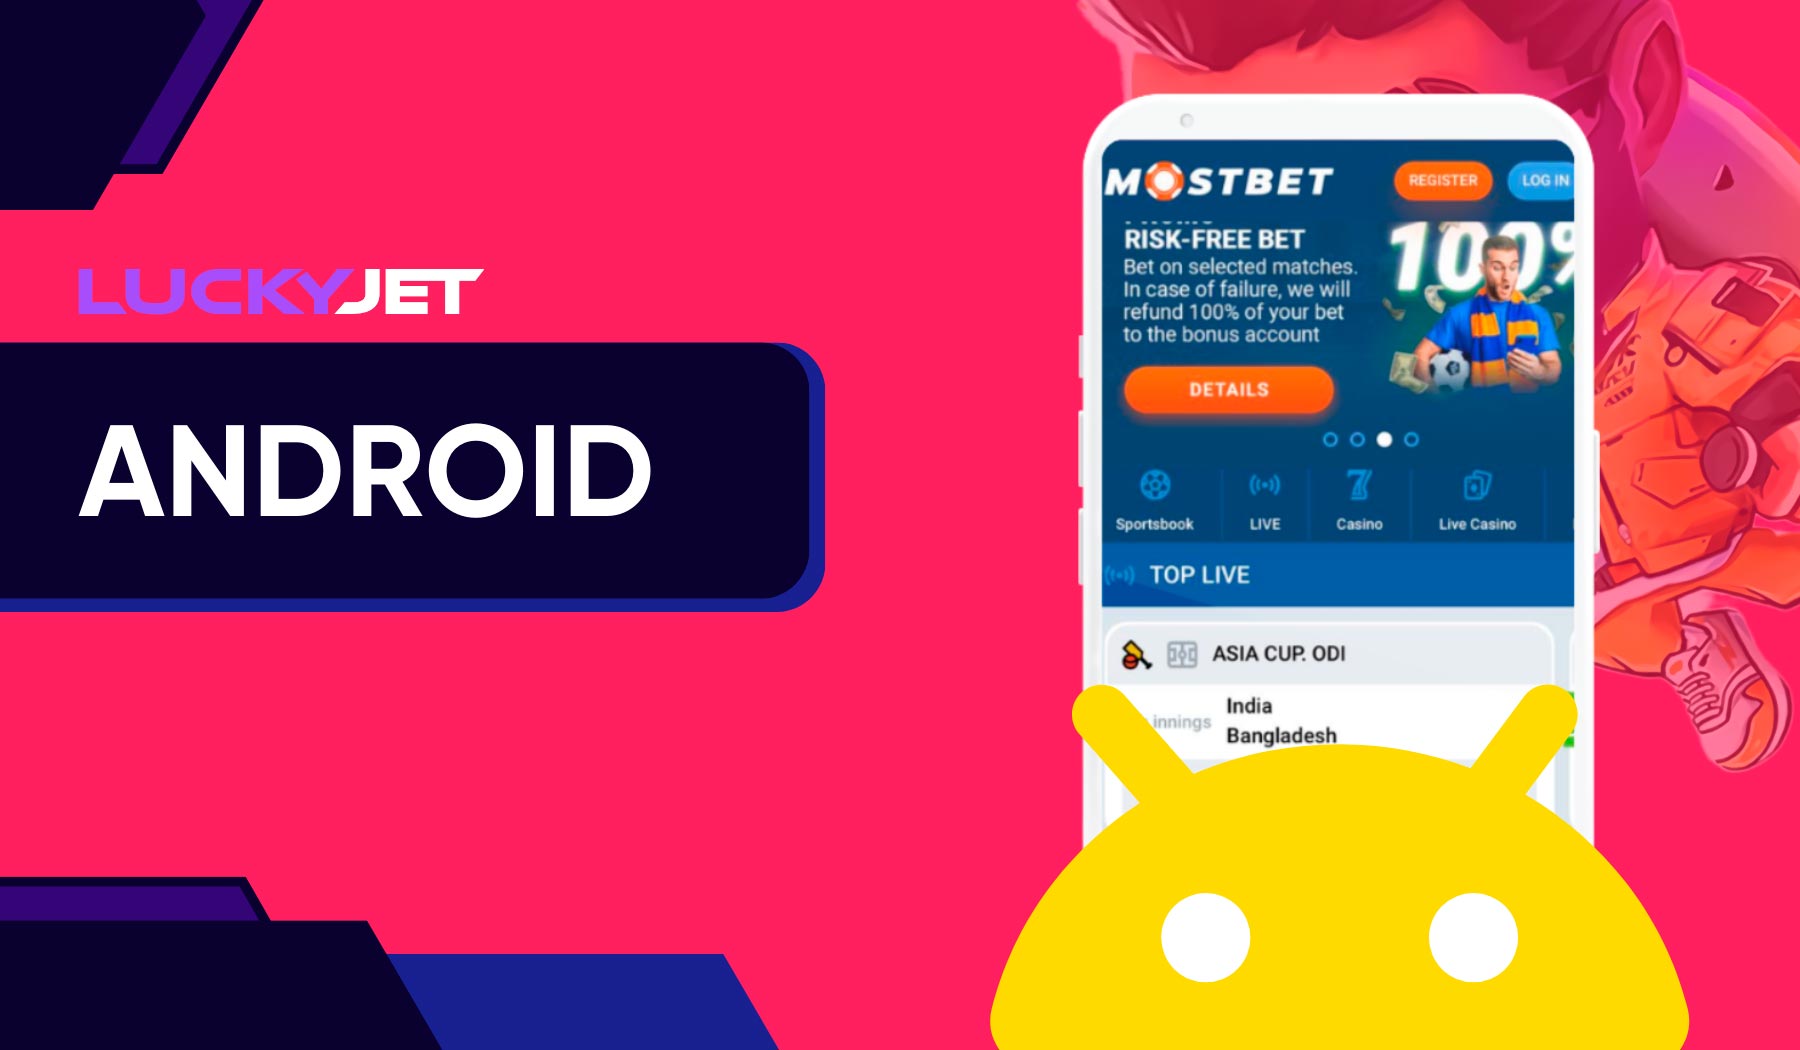 The Mostbet Android app